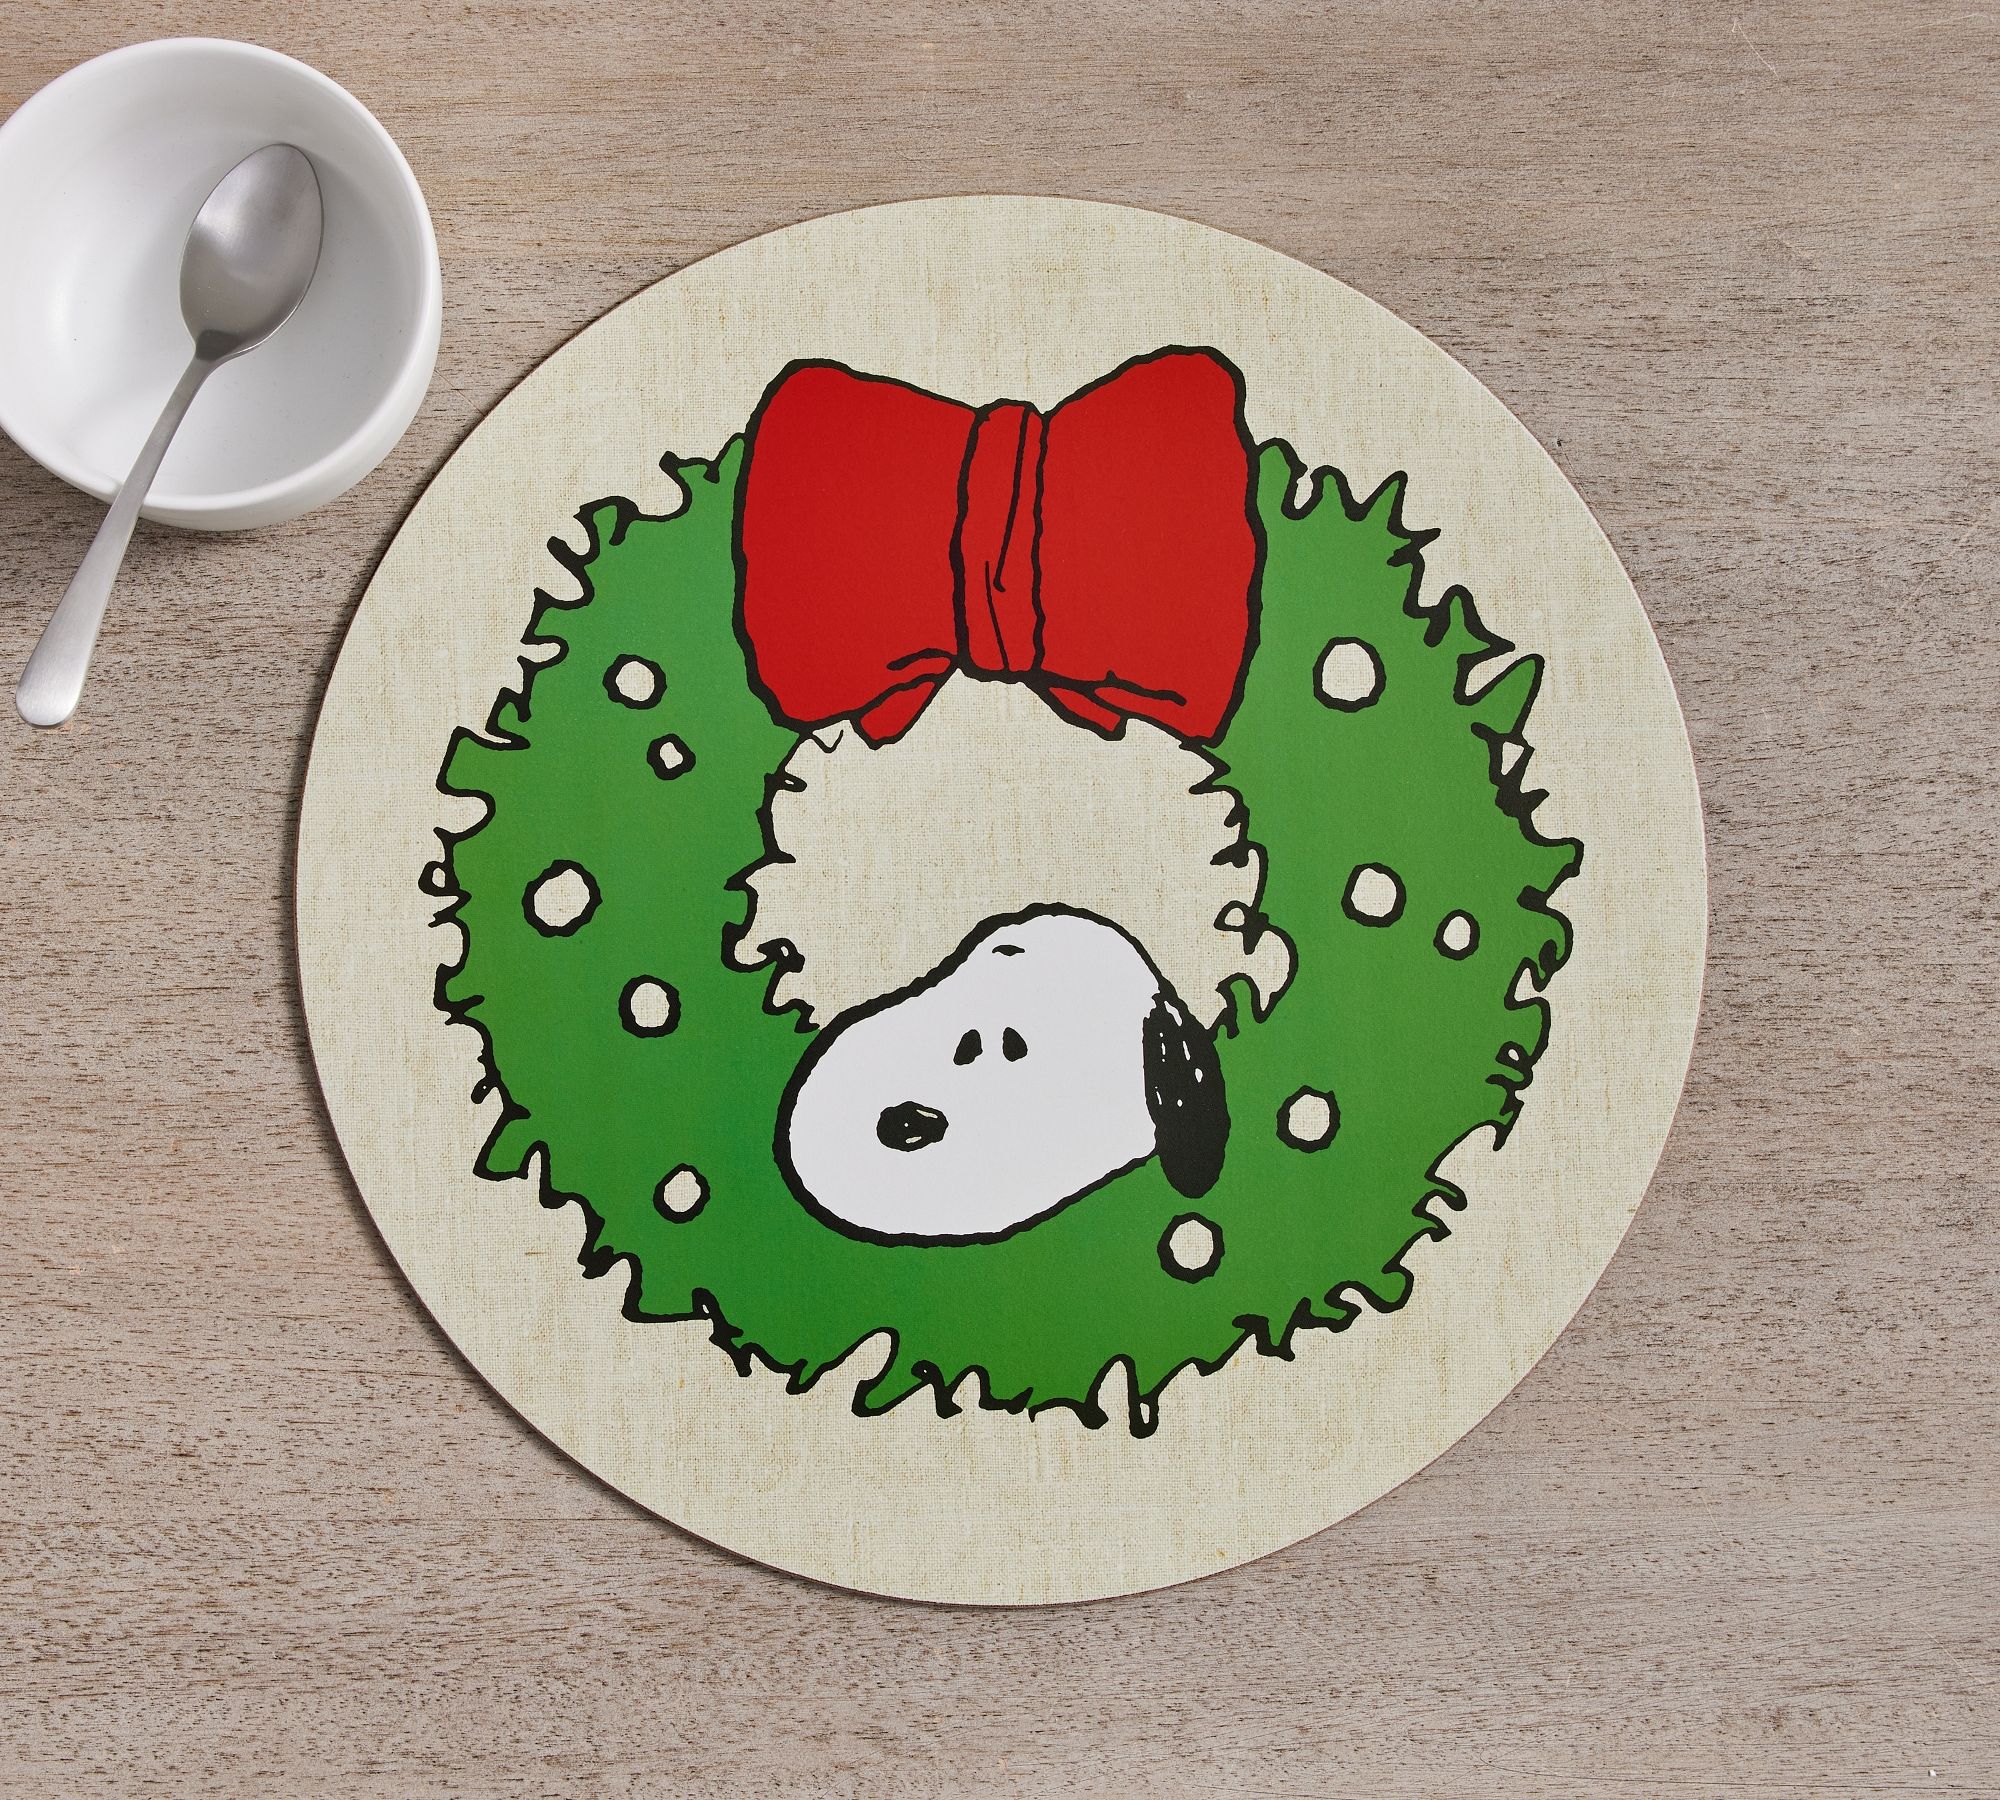 Peanuts™ Wreath Cork Placemats - Set of 4